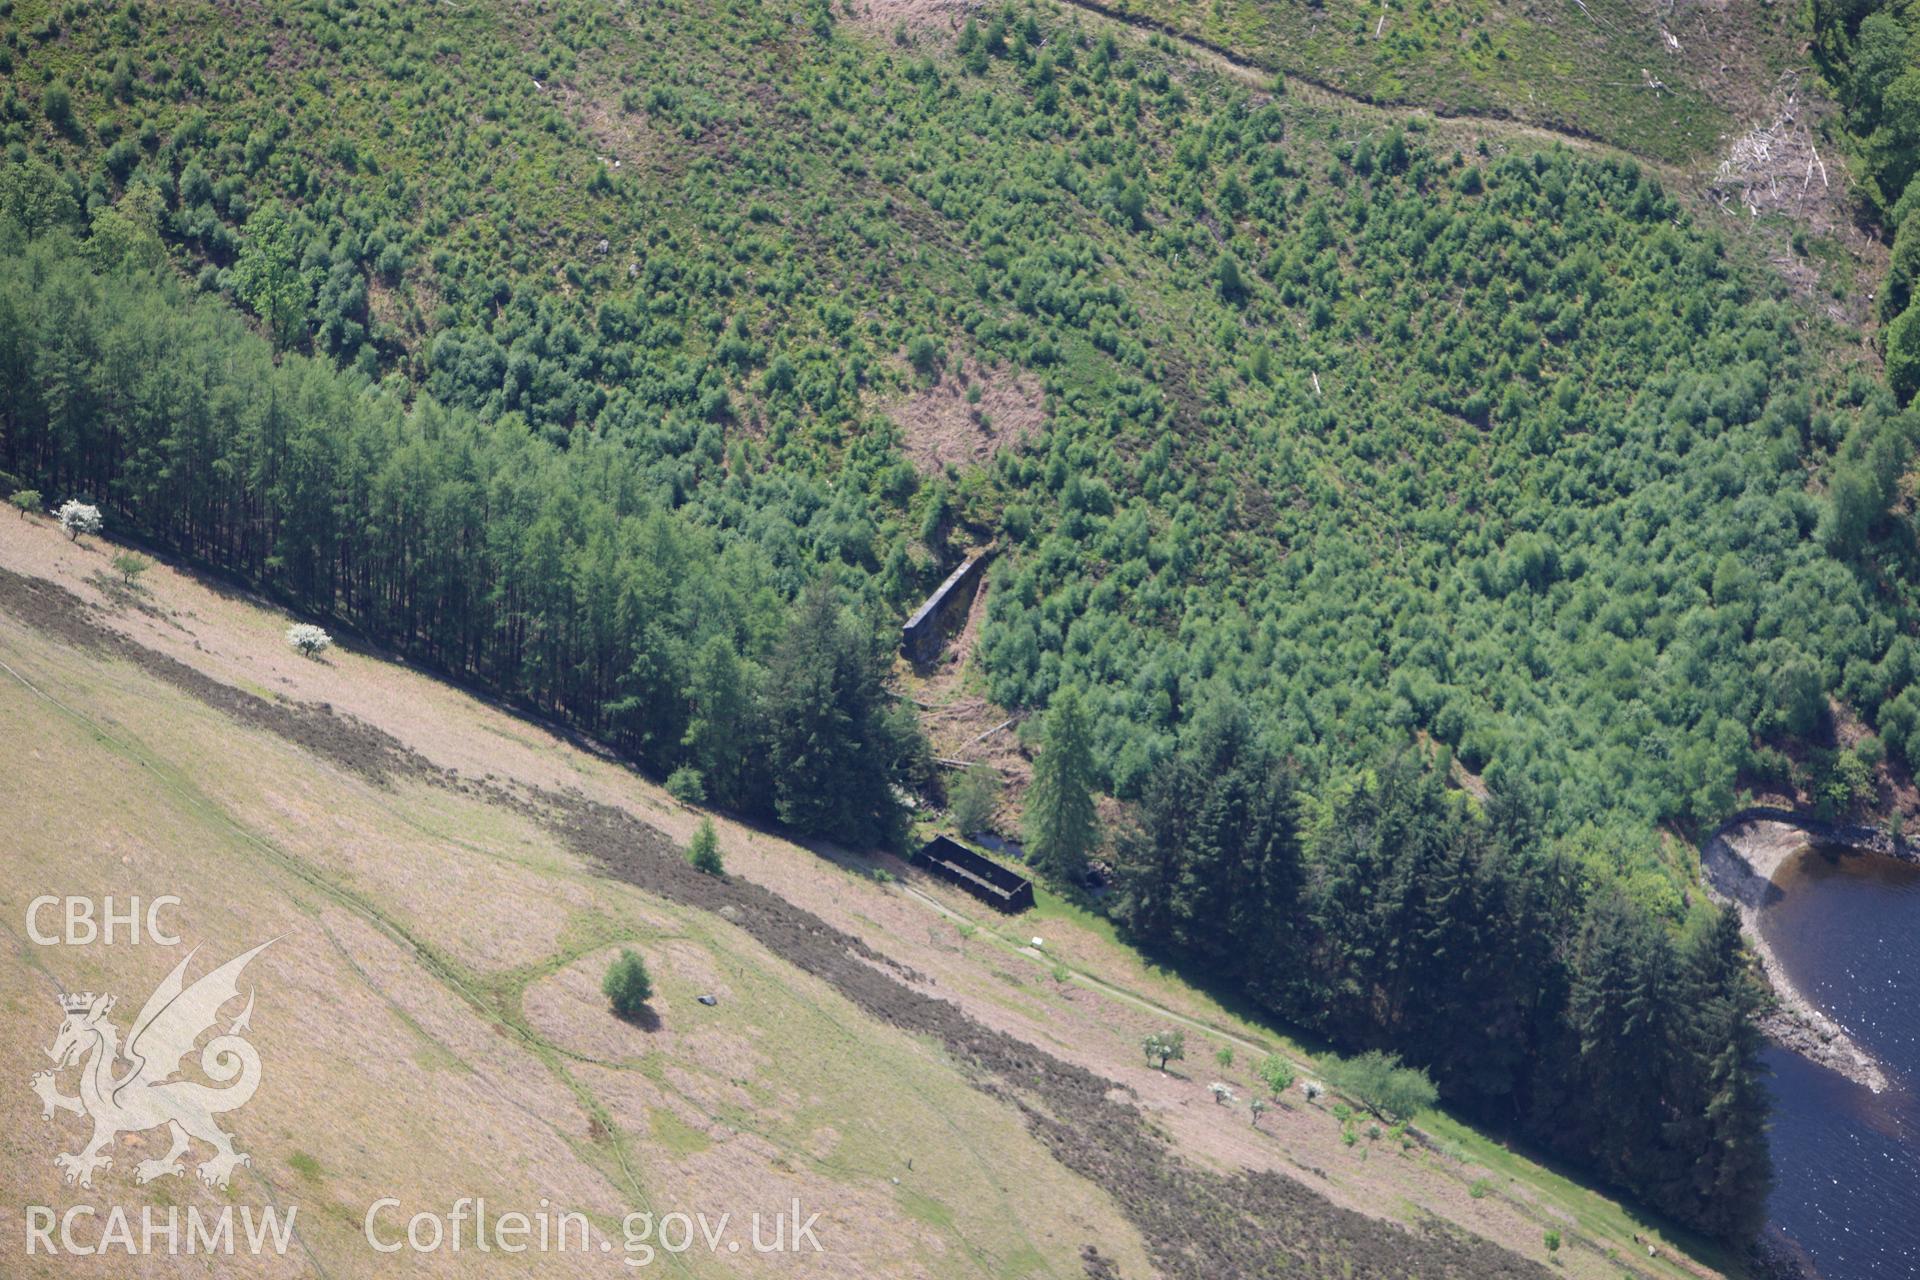 RCAHMW colour oblique photograph of Nant Y Gro Dam. Taken by Toby Driver on 28/05/2012.